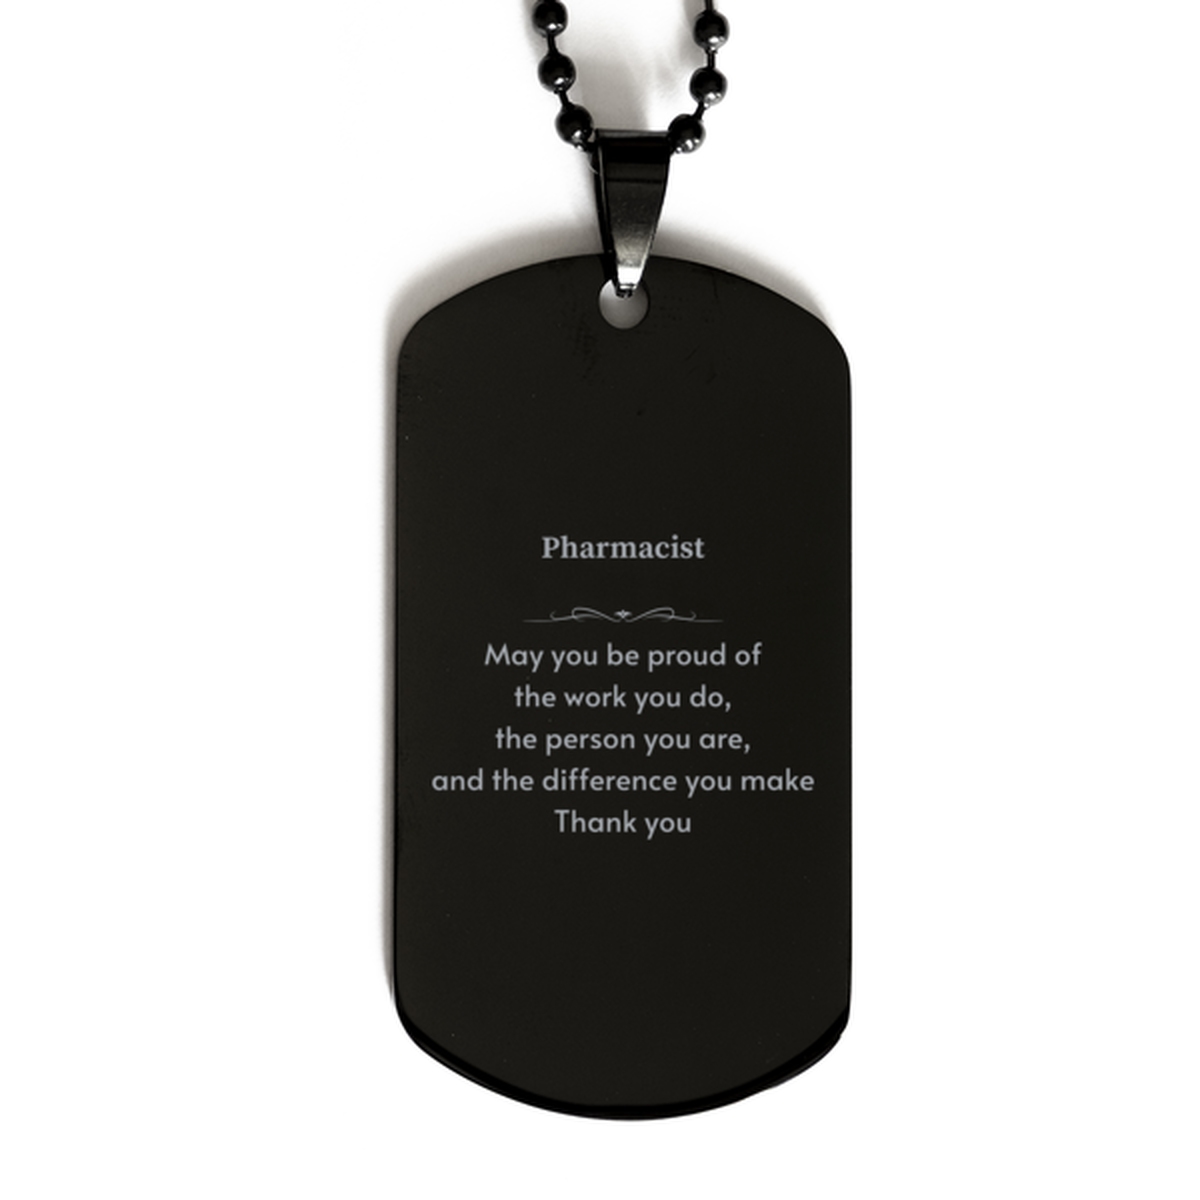 Heartwarming Black Dog Tag Retirement Coworkers Gifts for Pharmacist, Pharmacist May You be proud of the work you do, the person you are Gifts for Boss Men Women Friends